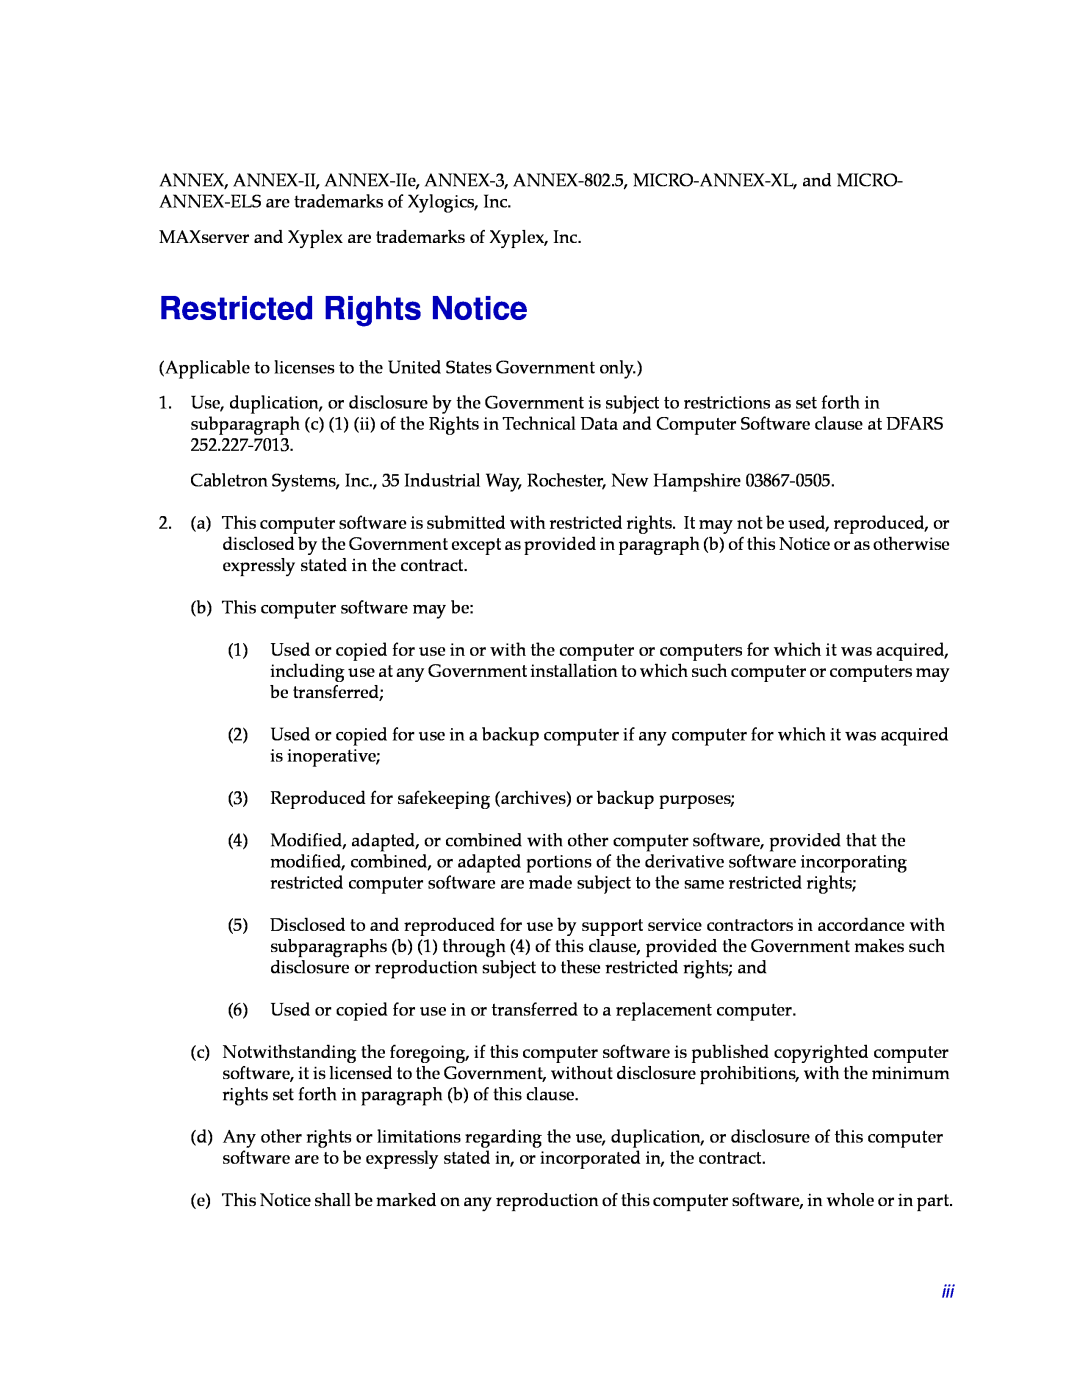 Cabletron Systems CSX200, CSX400 manual Restricted Rights Notice 